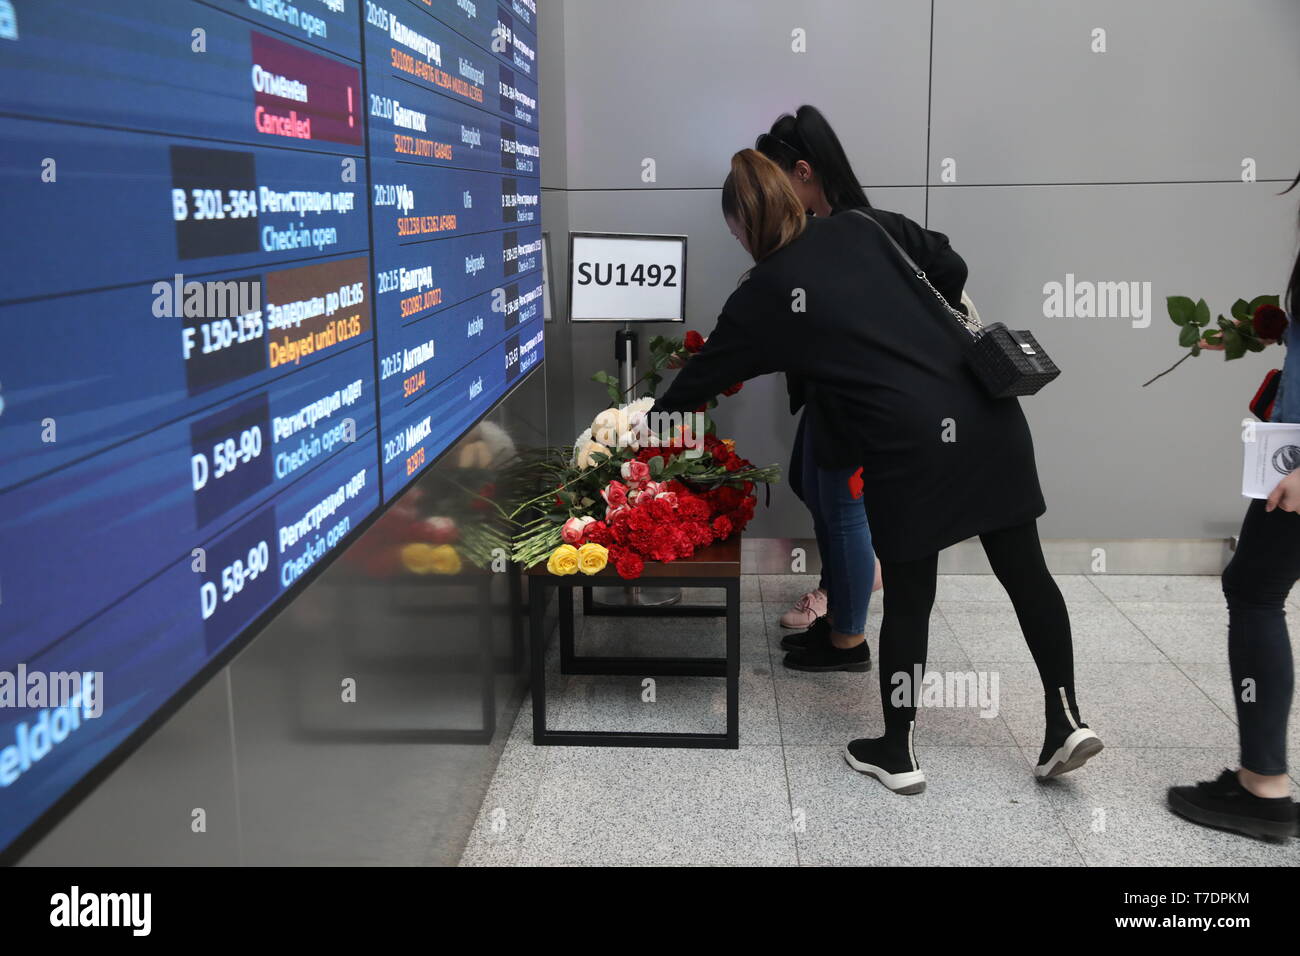 Moscow, Russia. 6th May, 2019. People lay flowers to mourn the victims of the SSJ-100 passenger plane fire at the terminal of the Sheremetyevo International Airport in Moscow, Russia, May 6, 2019. Russia's Investigative Committee confirmed Monday that 41 people were killed after an SSJ-100 passenger plane en route to the northwestern Russian city of Murmansk caught fire before an emergency landing Sunday at the Sheremetyevo International Airport in Moscow. Credit: Maxim Chernavsky/Xinhua/Alamy Live News Stock Photo